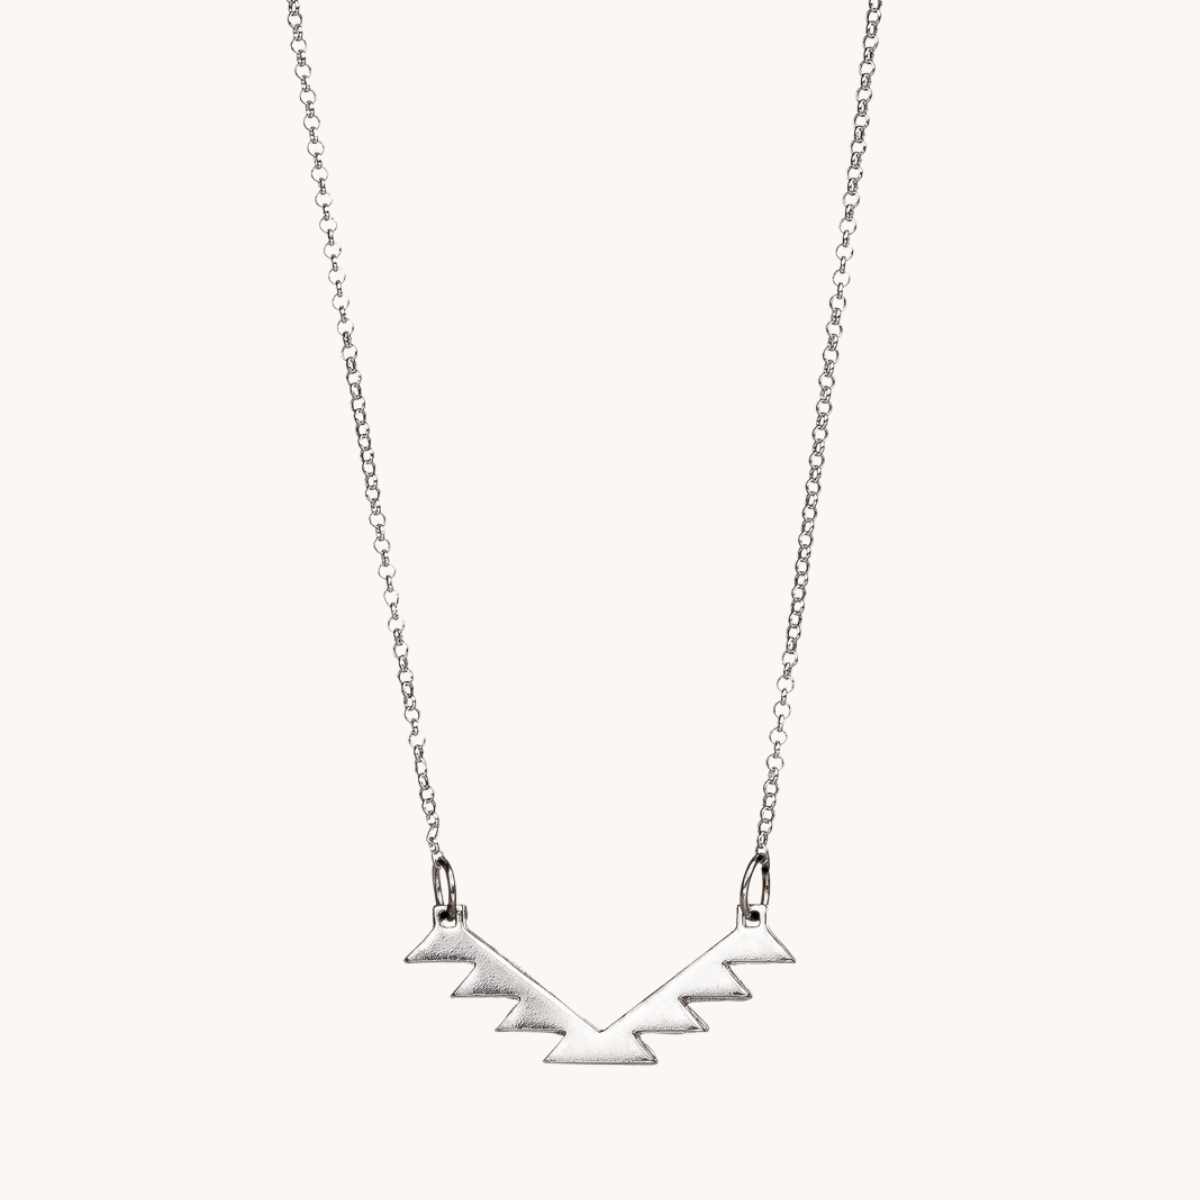 Silver Bar Necklace | T.Skies Jewelry